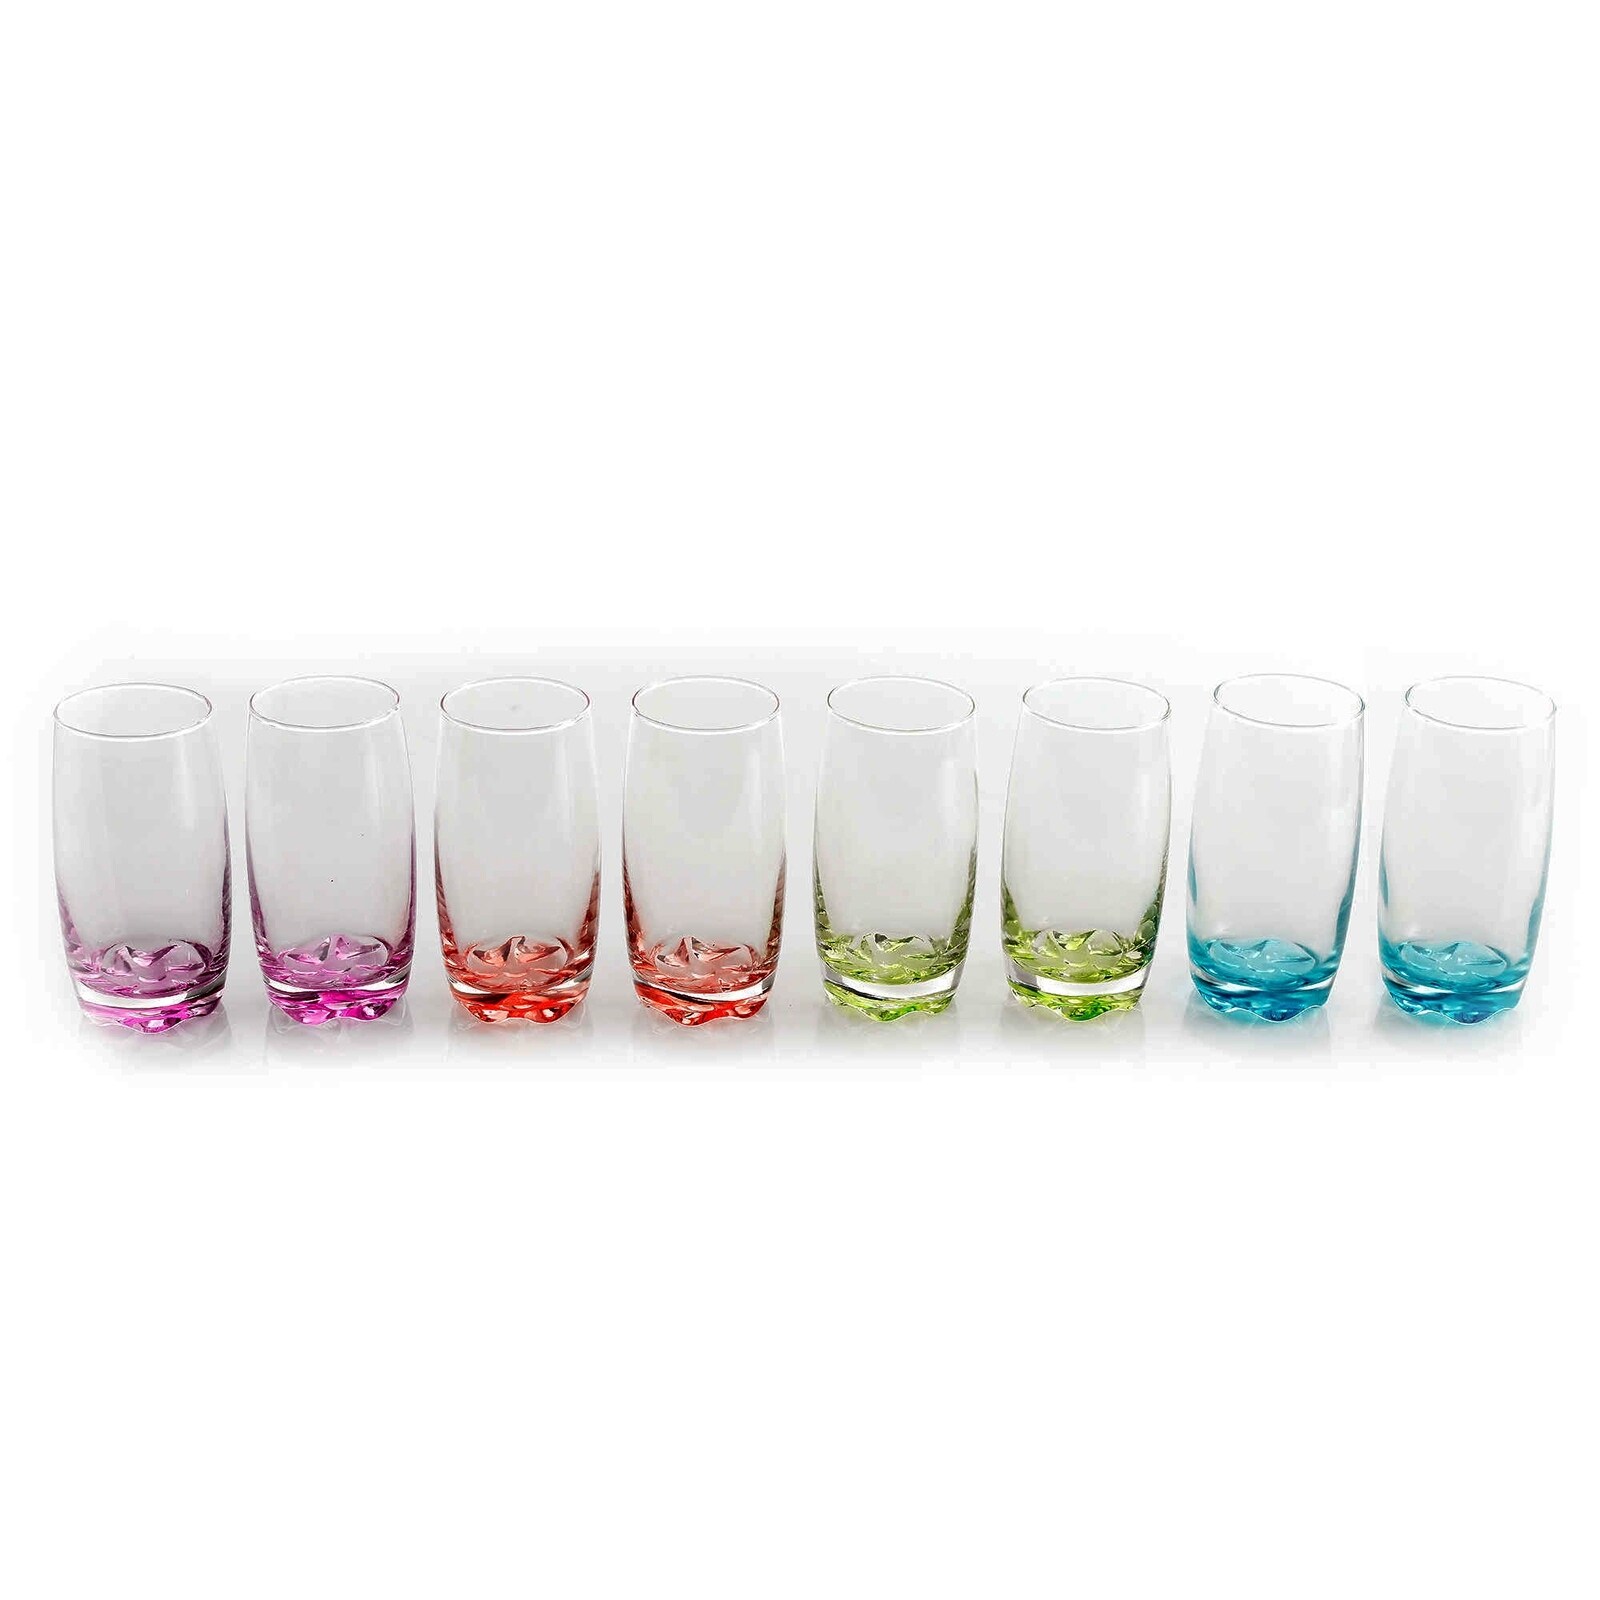 https://ak1.ostkcdn.com/images/products/is/images/direct/a06dd01e49929a7c746bb41a789b2e01ea172490/Gibson-Karissa-8pc-Glass-Tumbler-Set.jpg